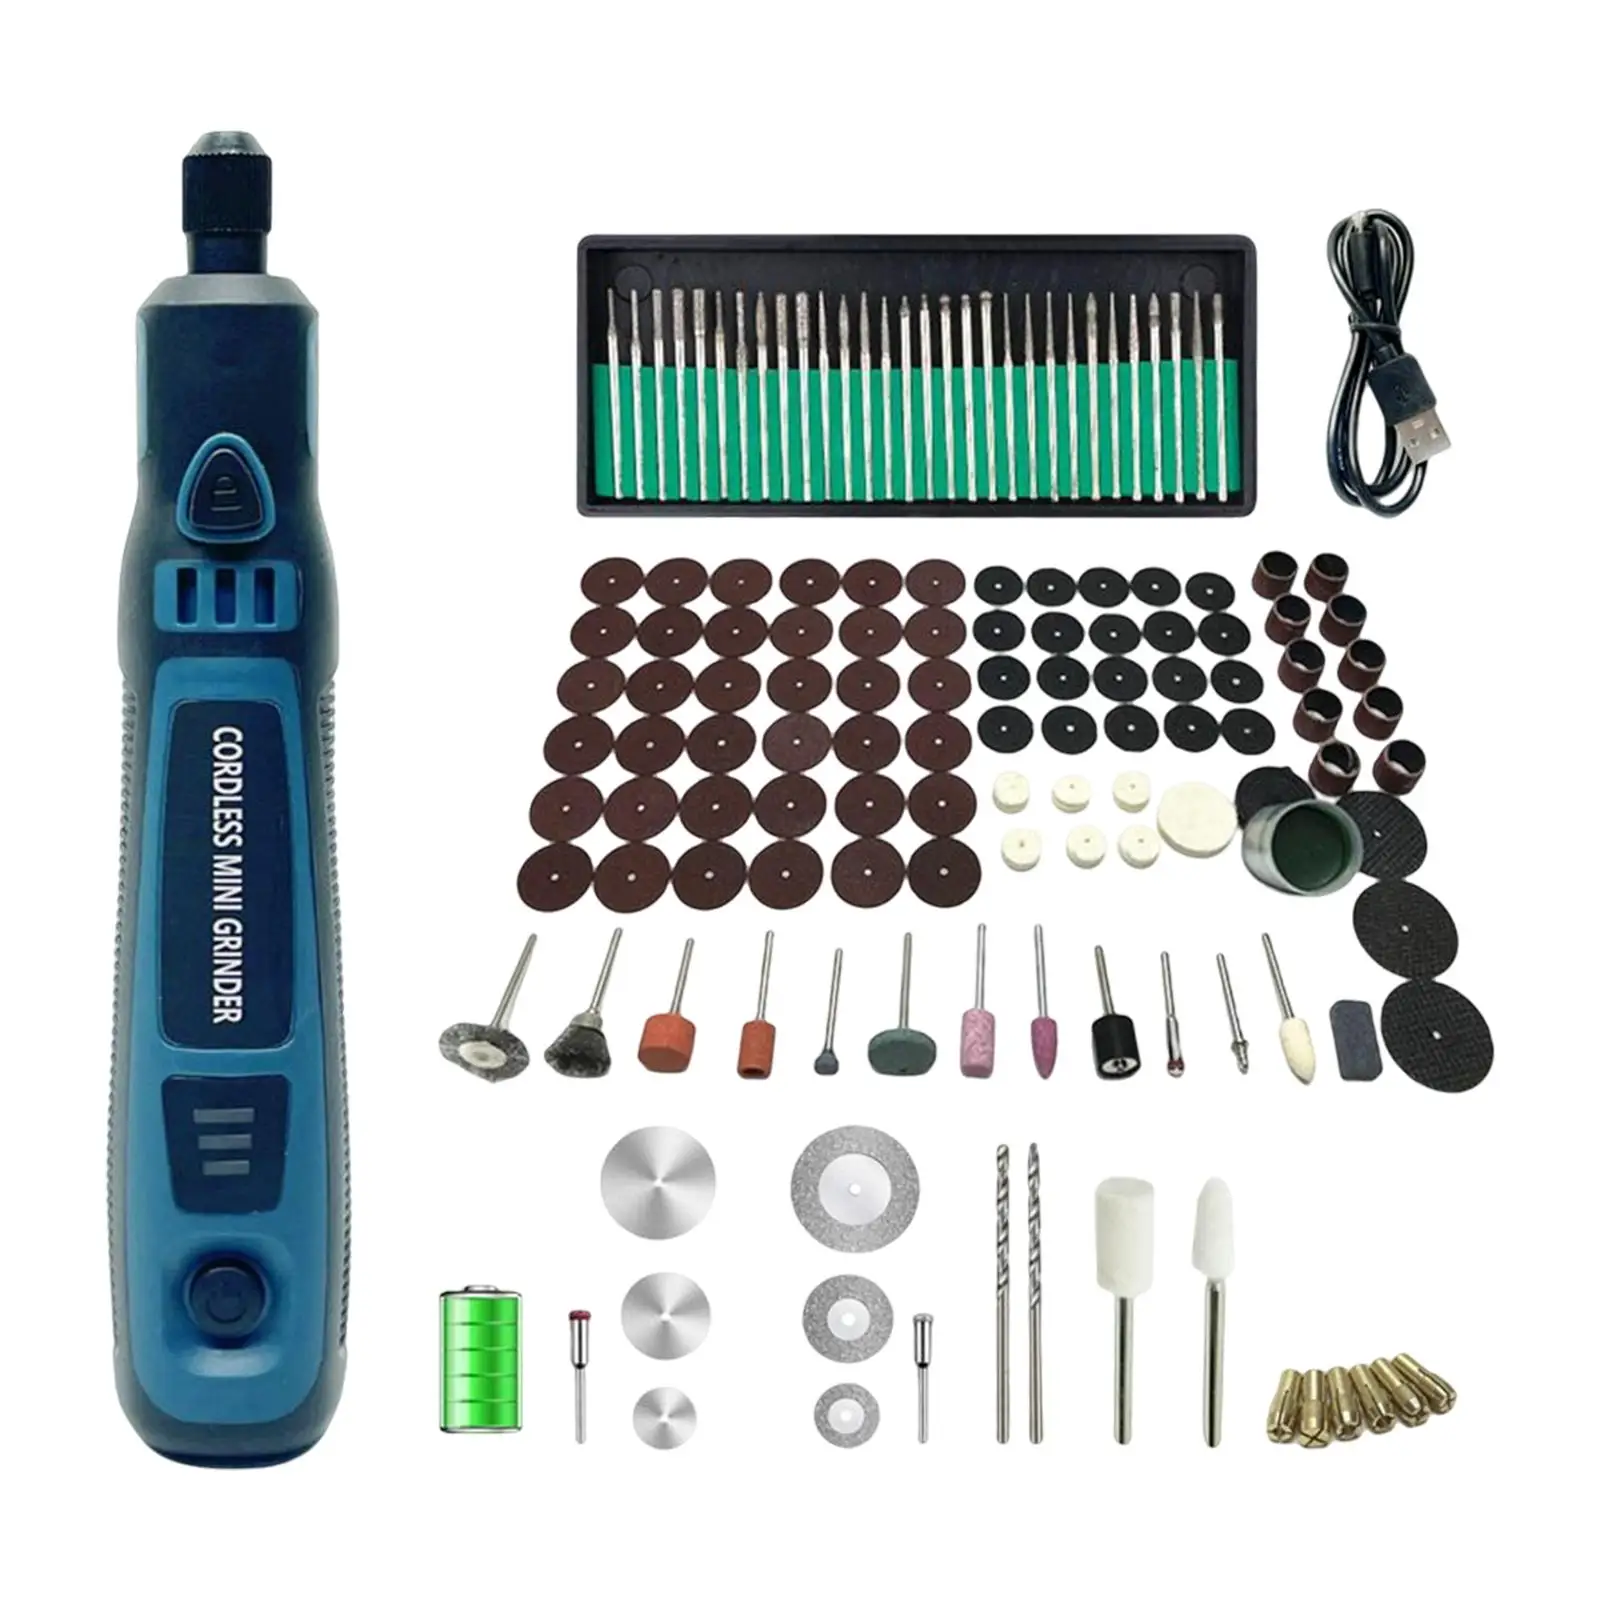 Portable Grinder Kit with Accessories 3 Speeds USB Rechargable for Drilling Sanding